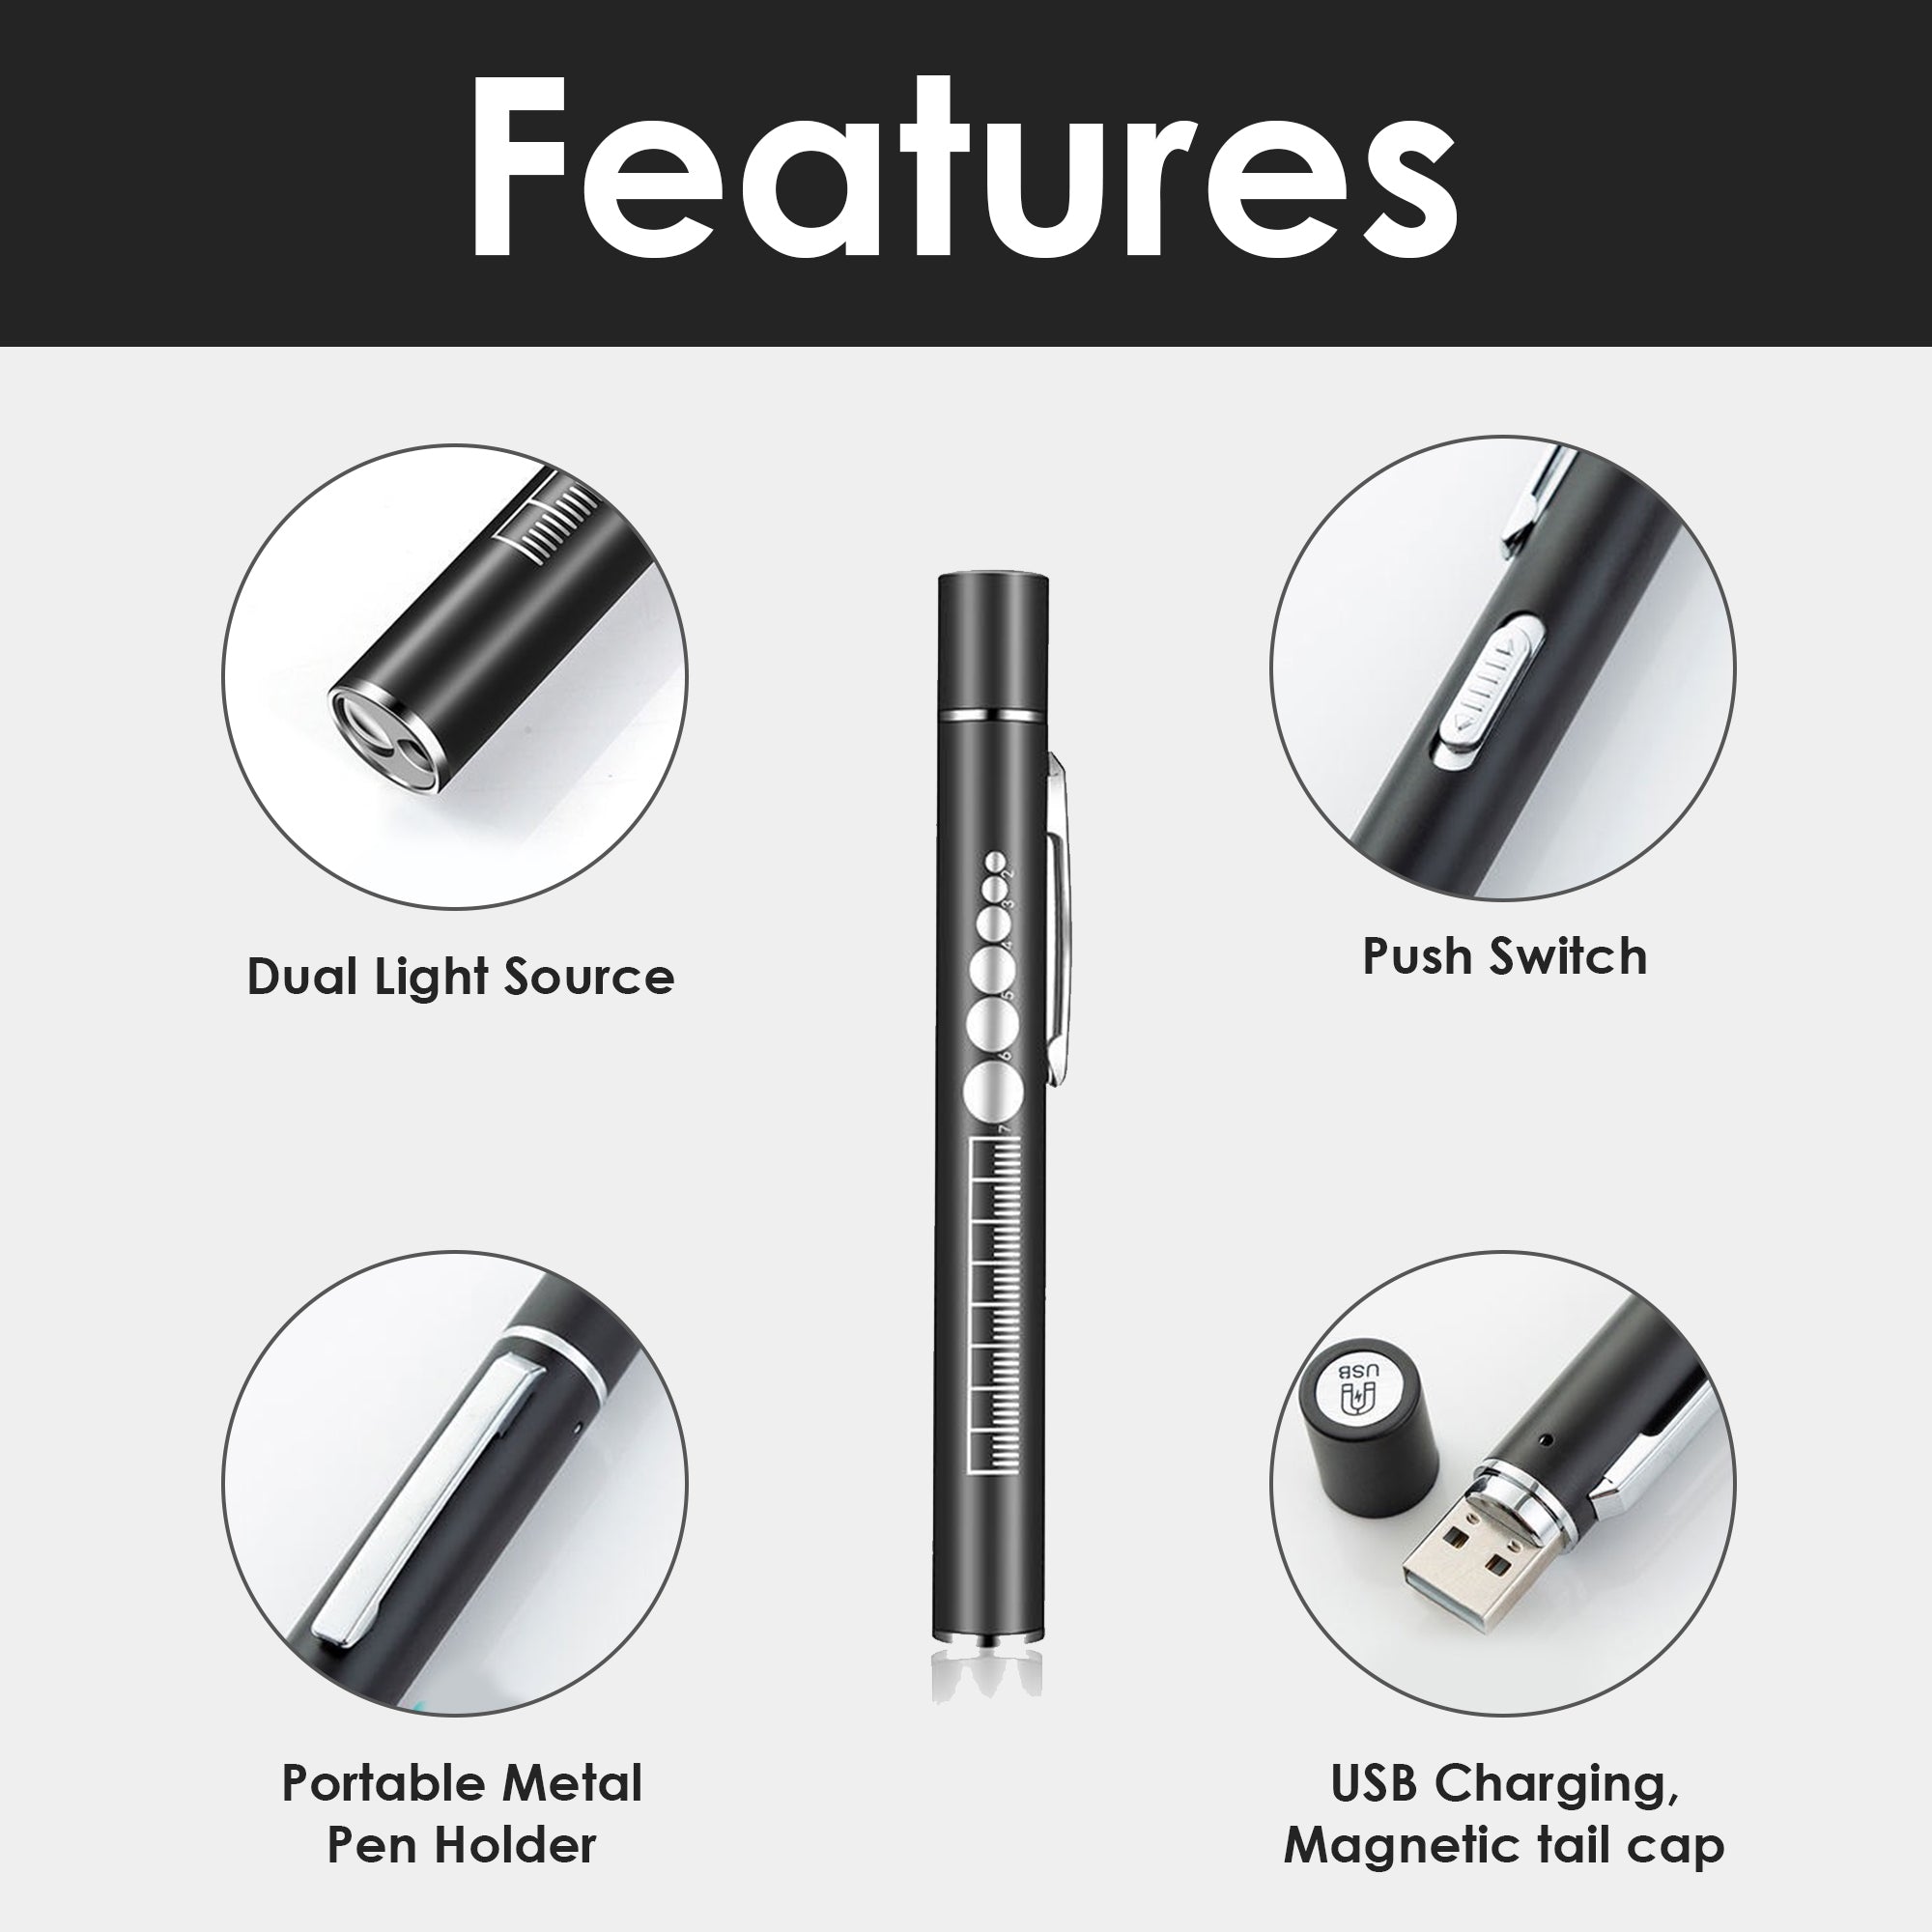 URHEALTH Pen Light | Medical LED Penlight with Pupil Gauge for Students Doctors and Nurses | USB Rechargeable | Black